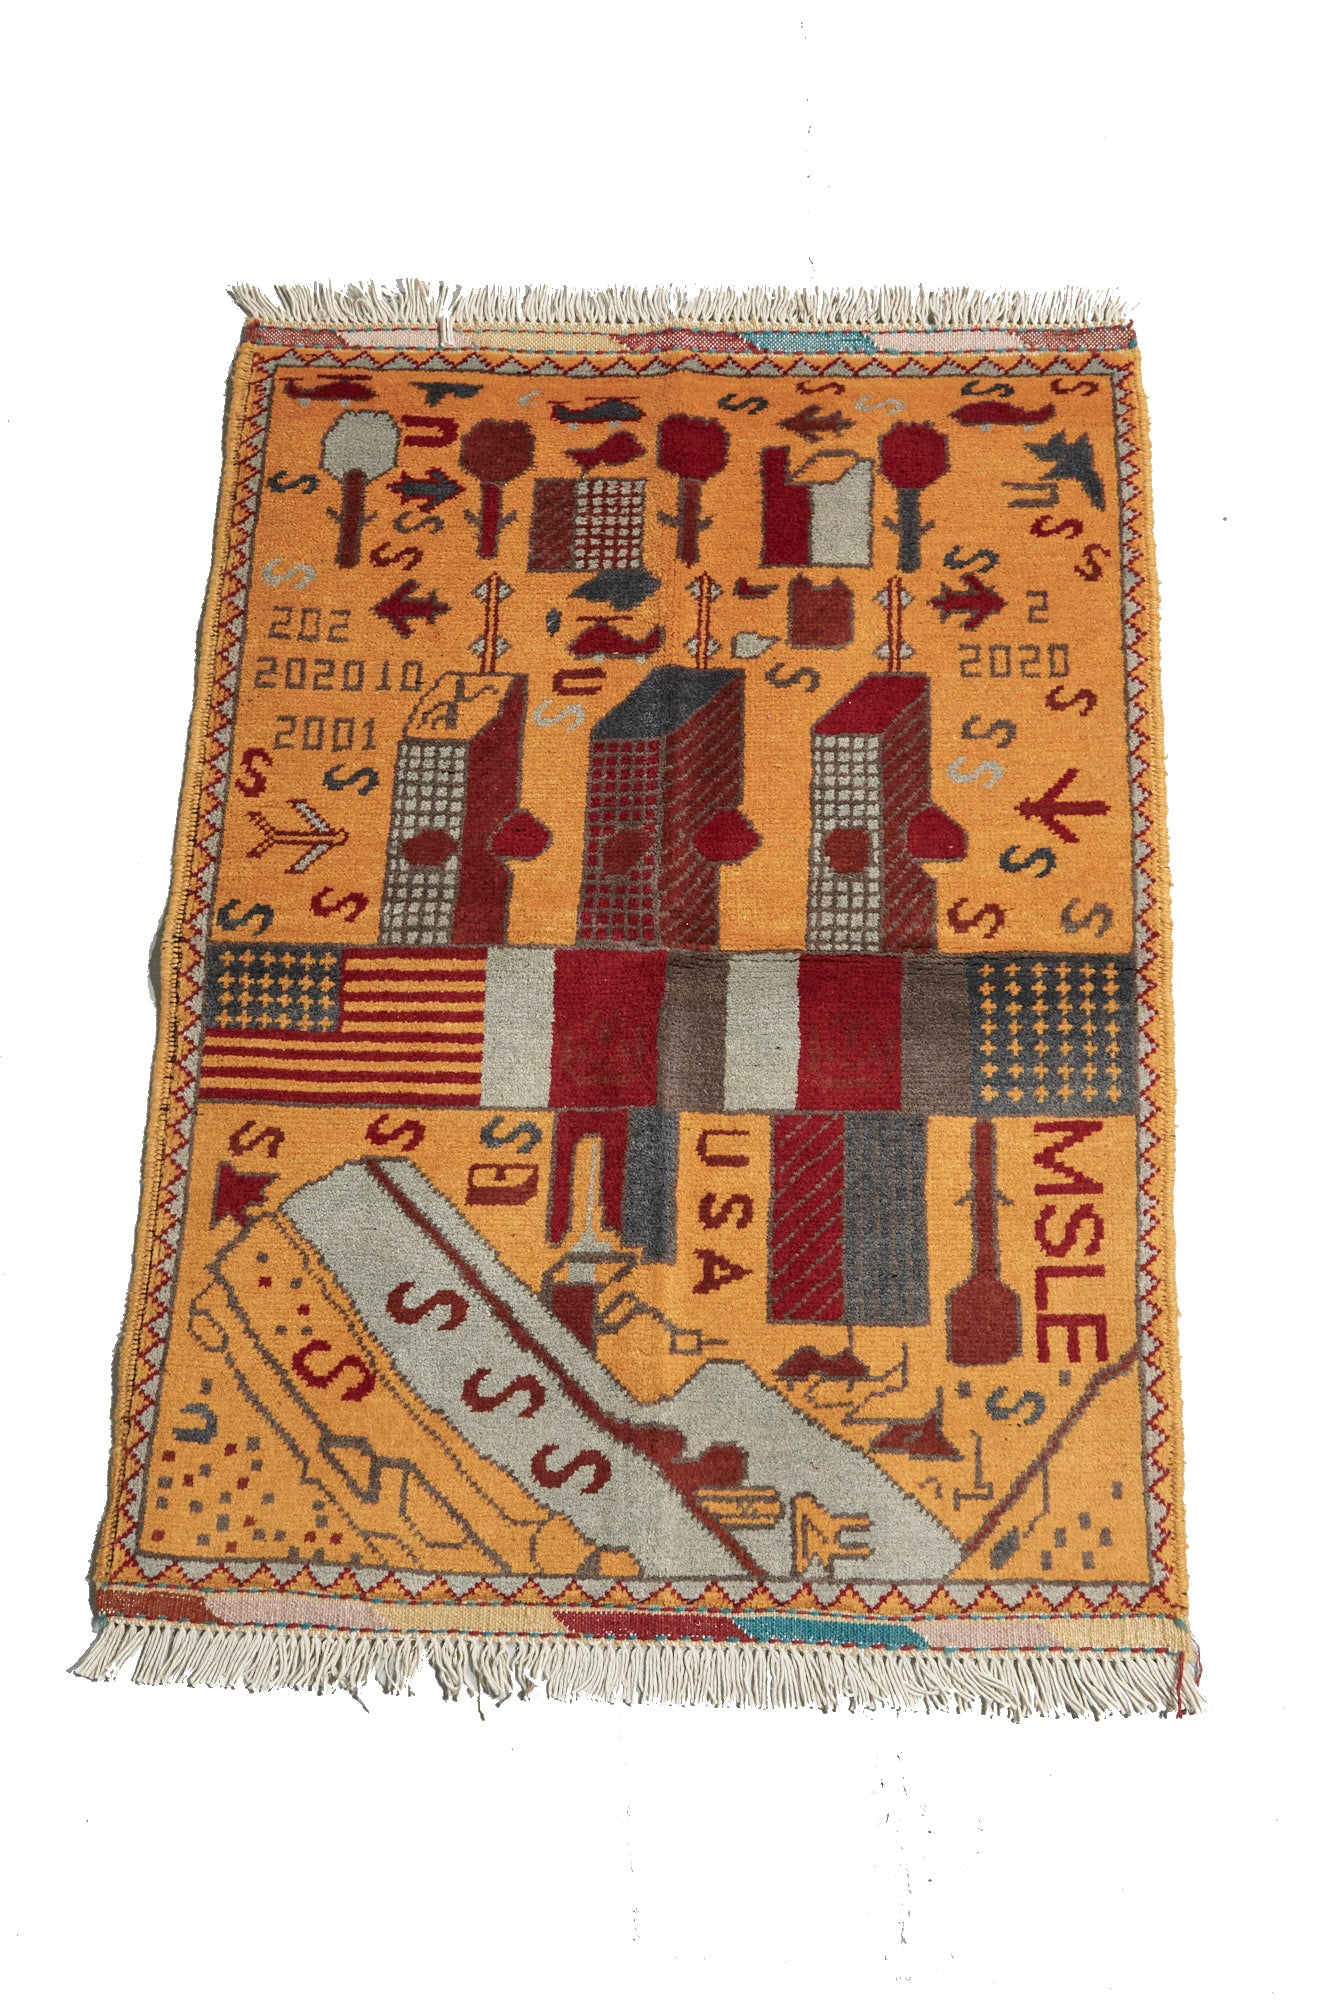 Afghan War Rug - Handwoven with images of twin towers, planes, helicopters available from King Kennedy Rugs Los Angeles 